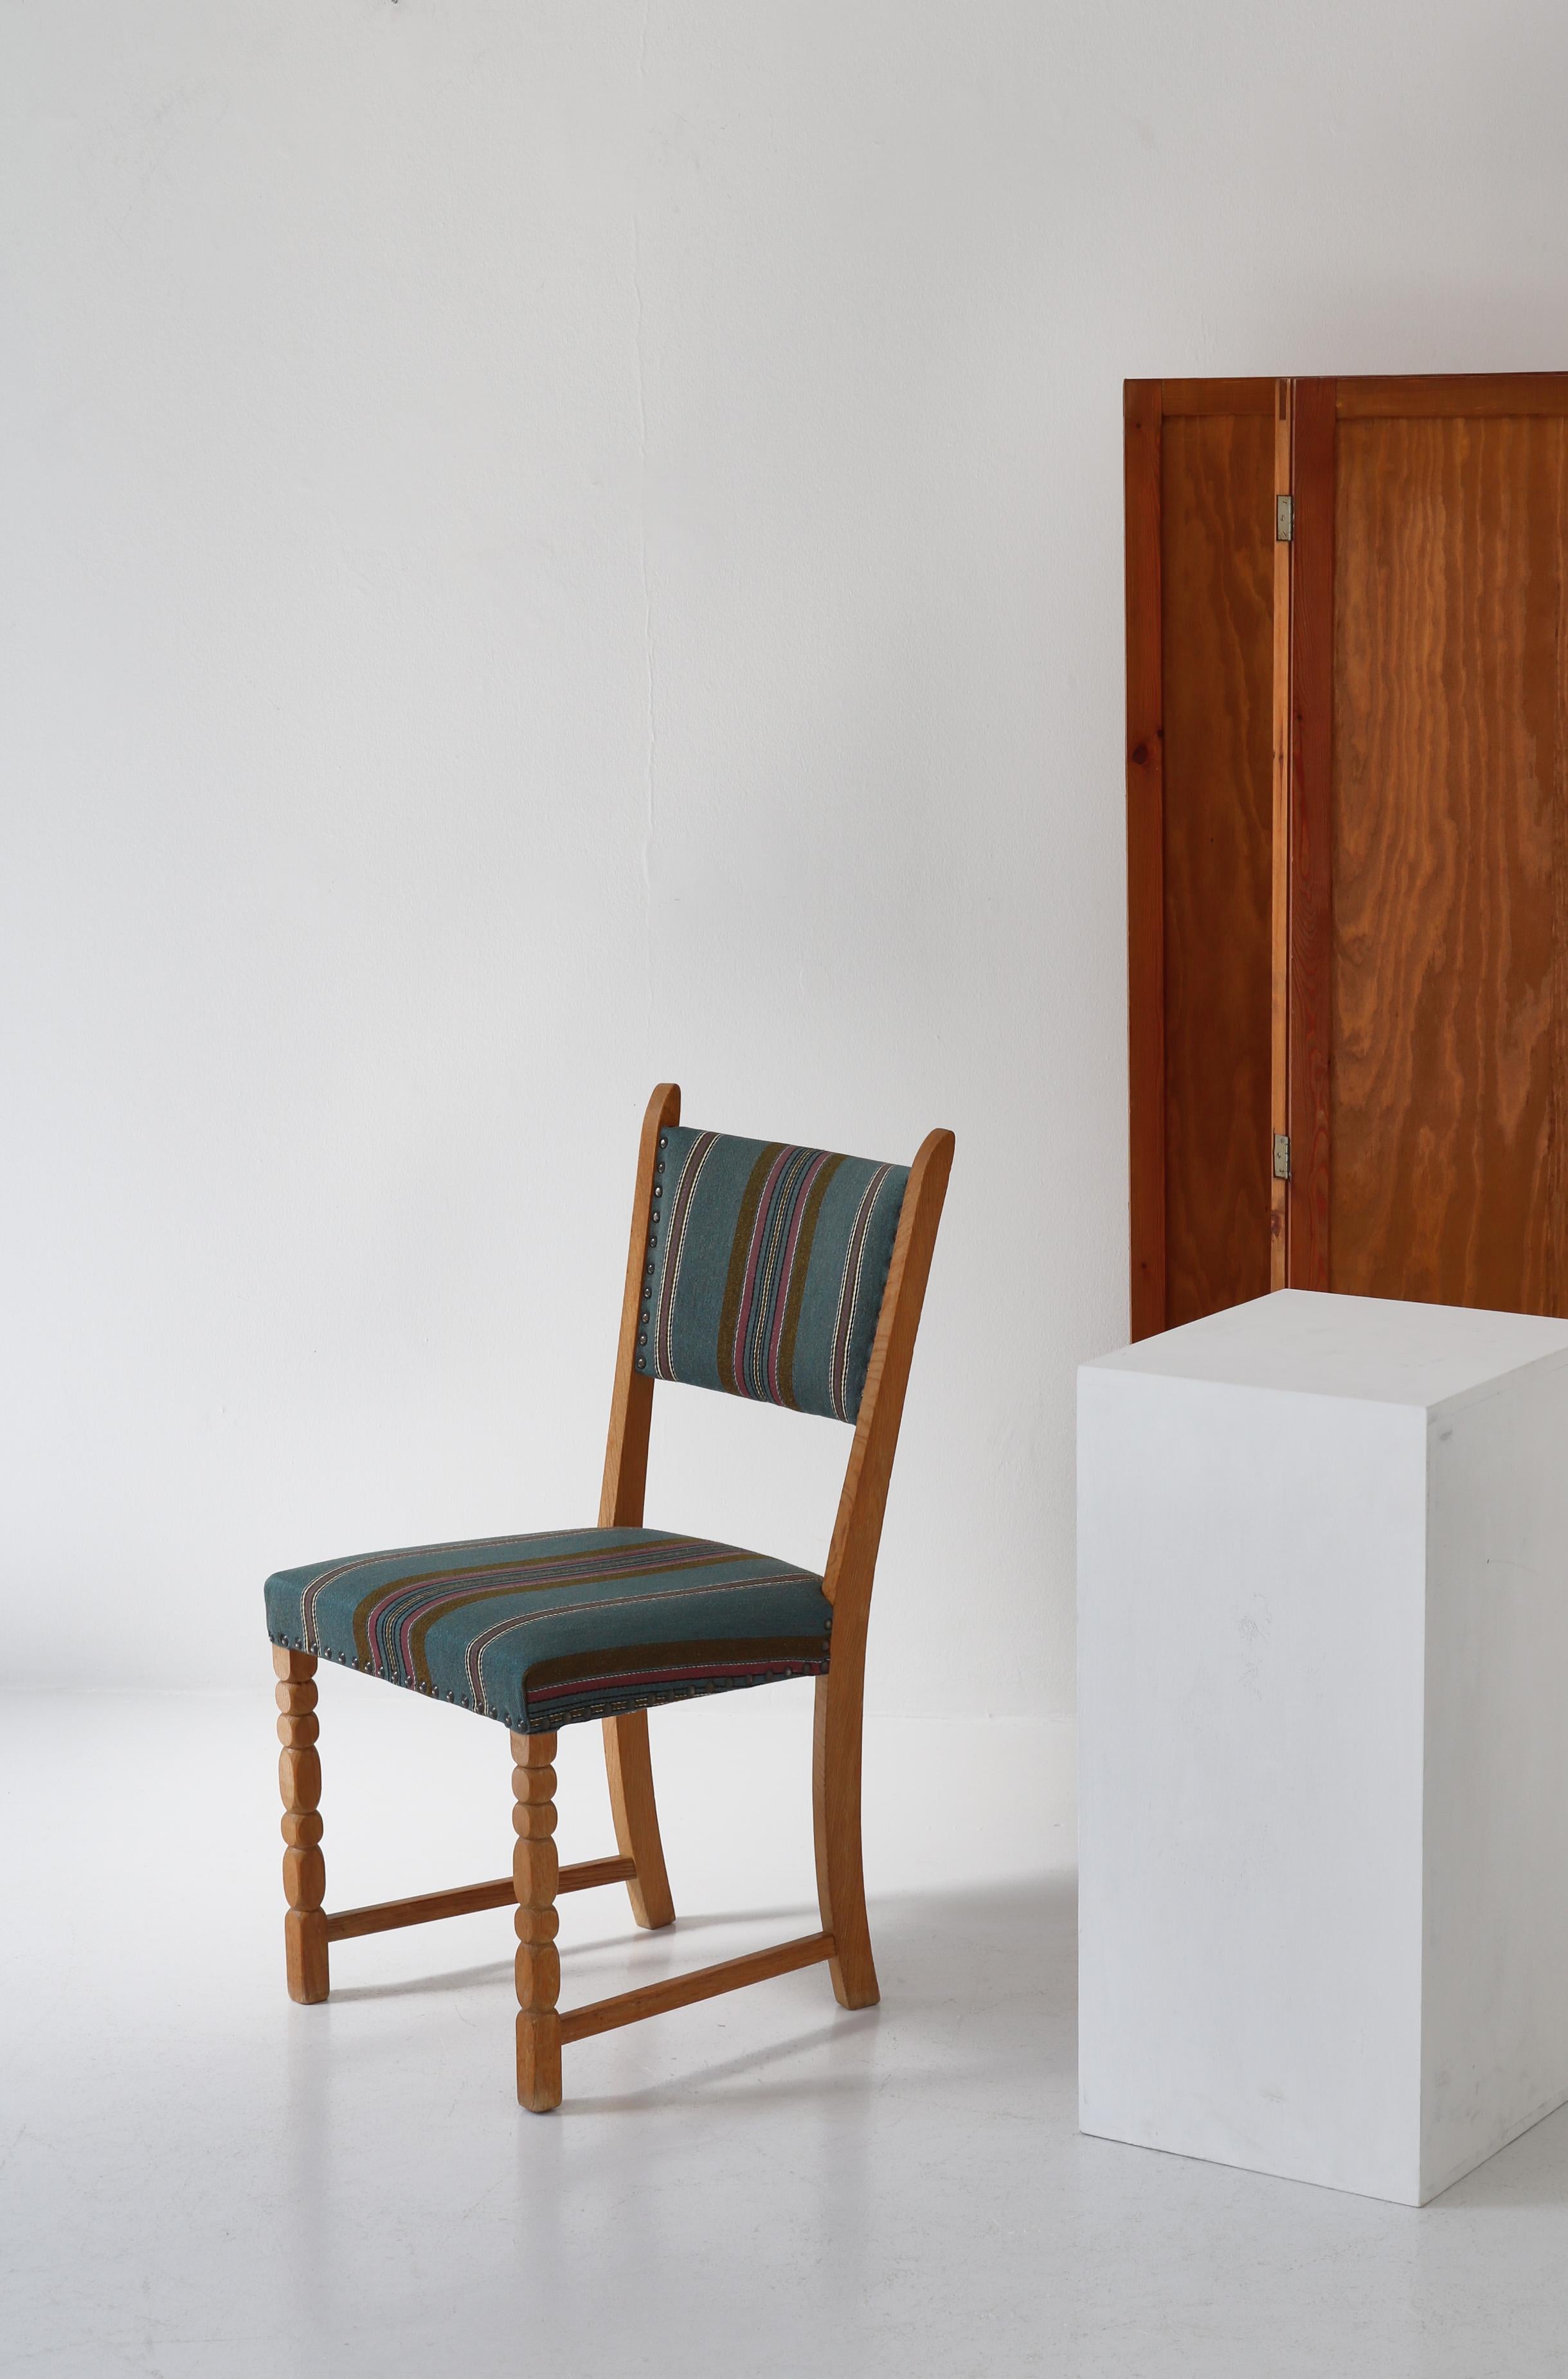 Vintage side chair in solid patinated Scandinavian oak tree and wonderful vintage wool upholstery. This model was designed in the 1960s and is ascribed to Henry Kjærnulff, Denmark. The style is modern but with playful hints to historical chairs. The